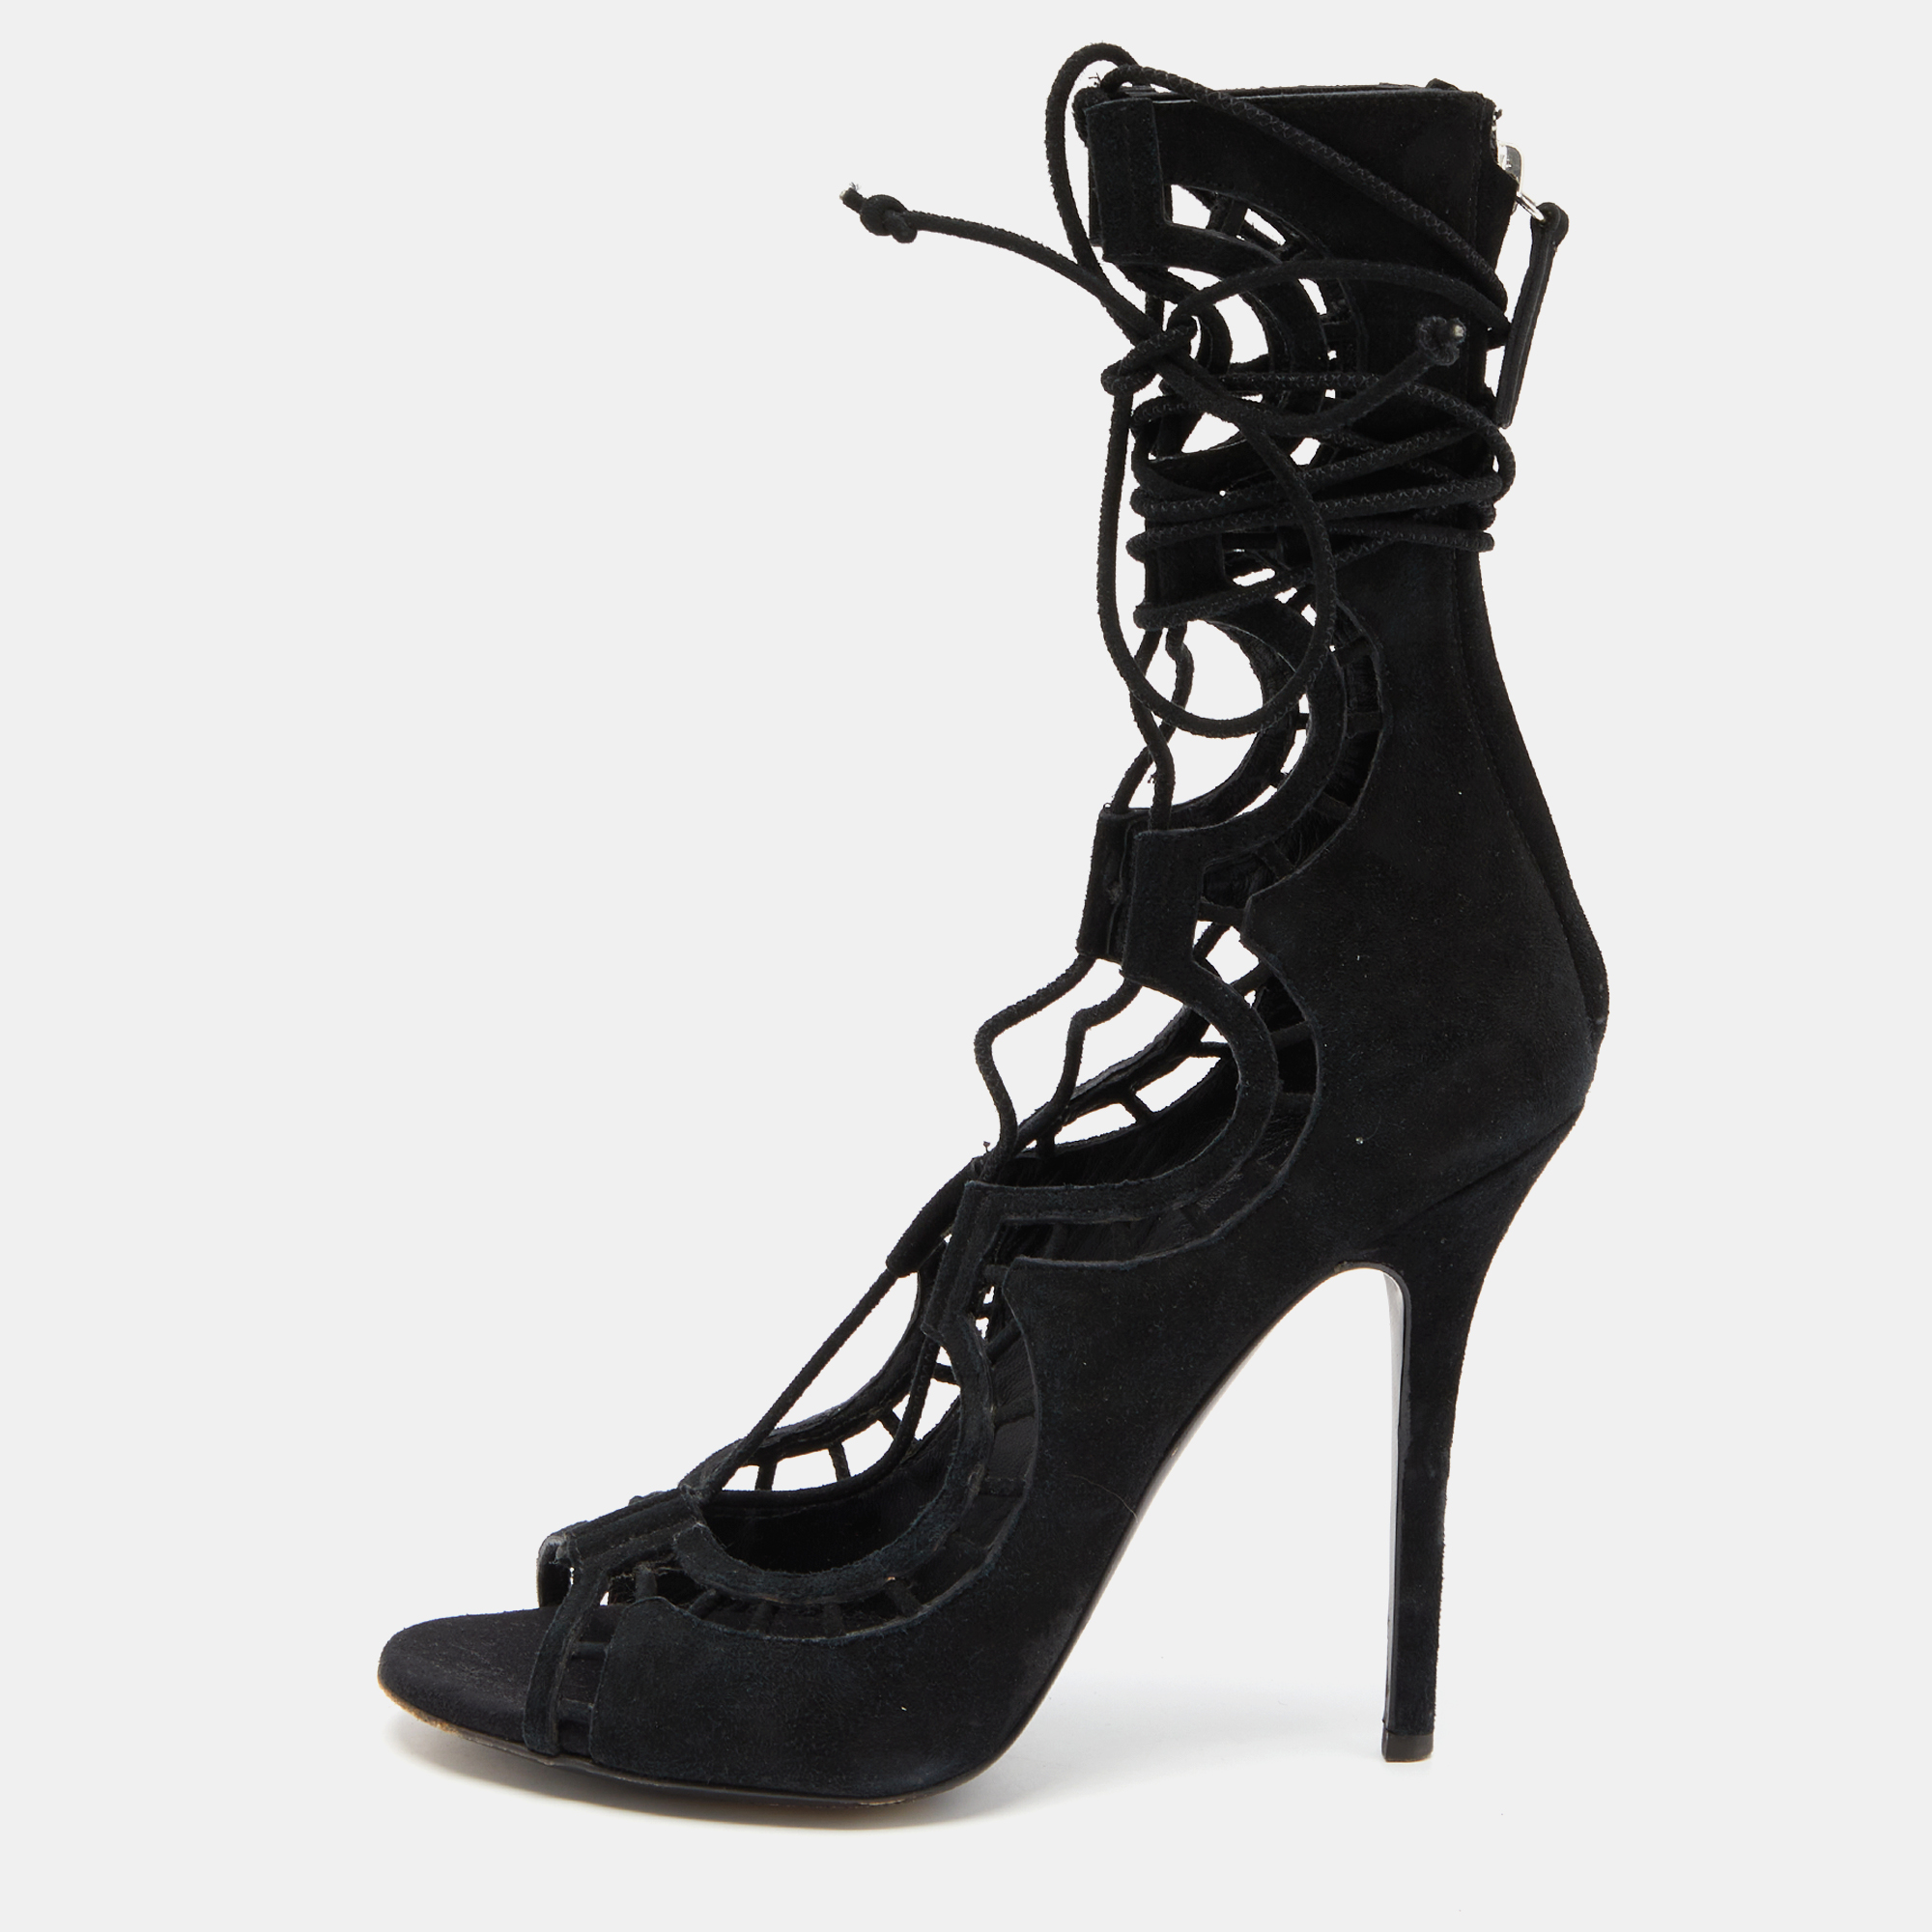 

Giuseppe Zanotti Black Suede Cut Out Strappy High Peep Toe Sandals Size